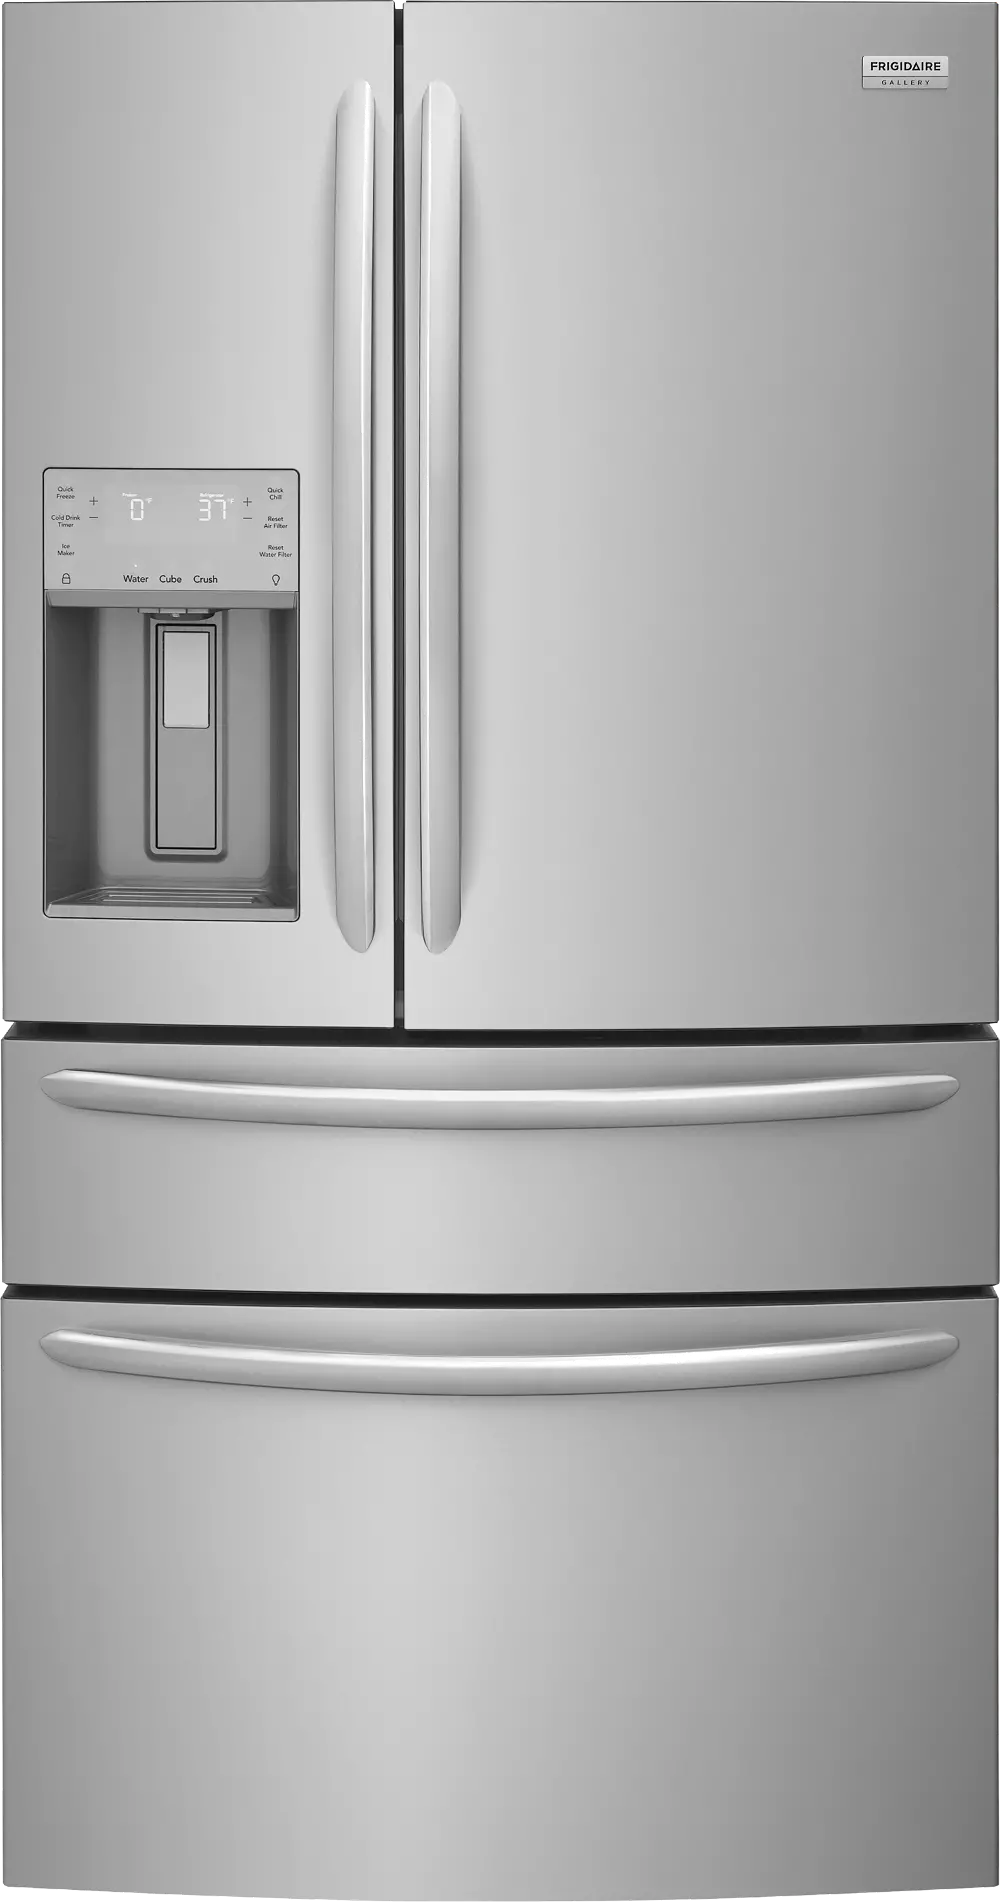 FG4H2272UF Frigidaire Gallery 21.8 cu ft French Door Refrigerator - Counter Depth Stainless Steel-1